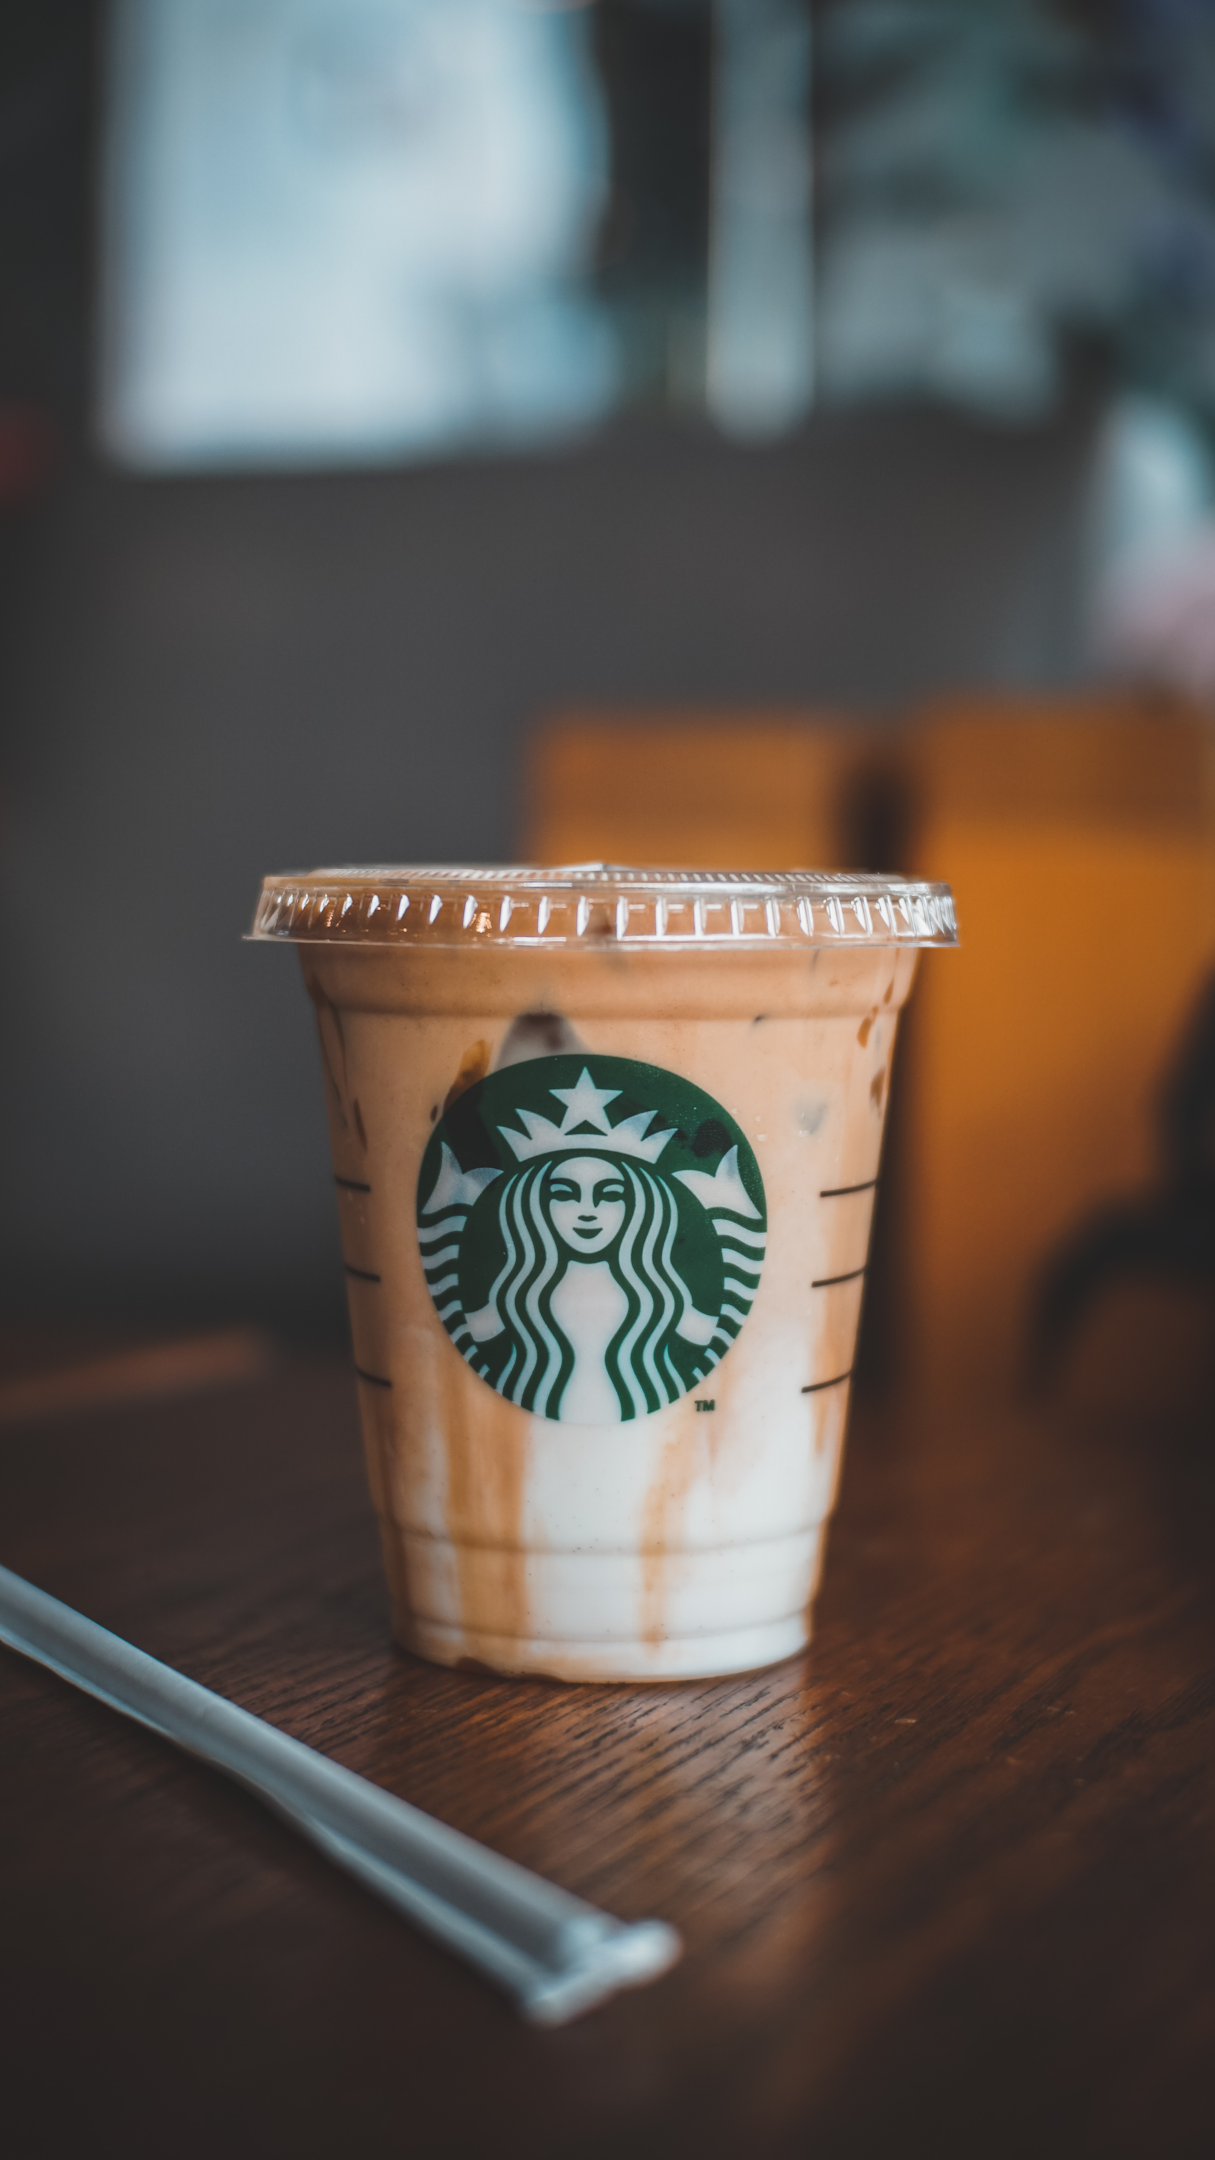 There's lots to learn from brands like Starbucks the thave mastered brand recognition.